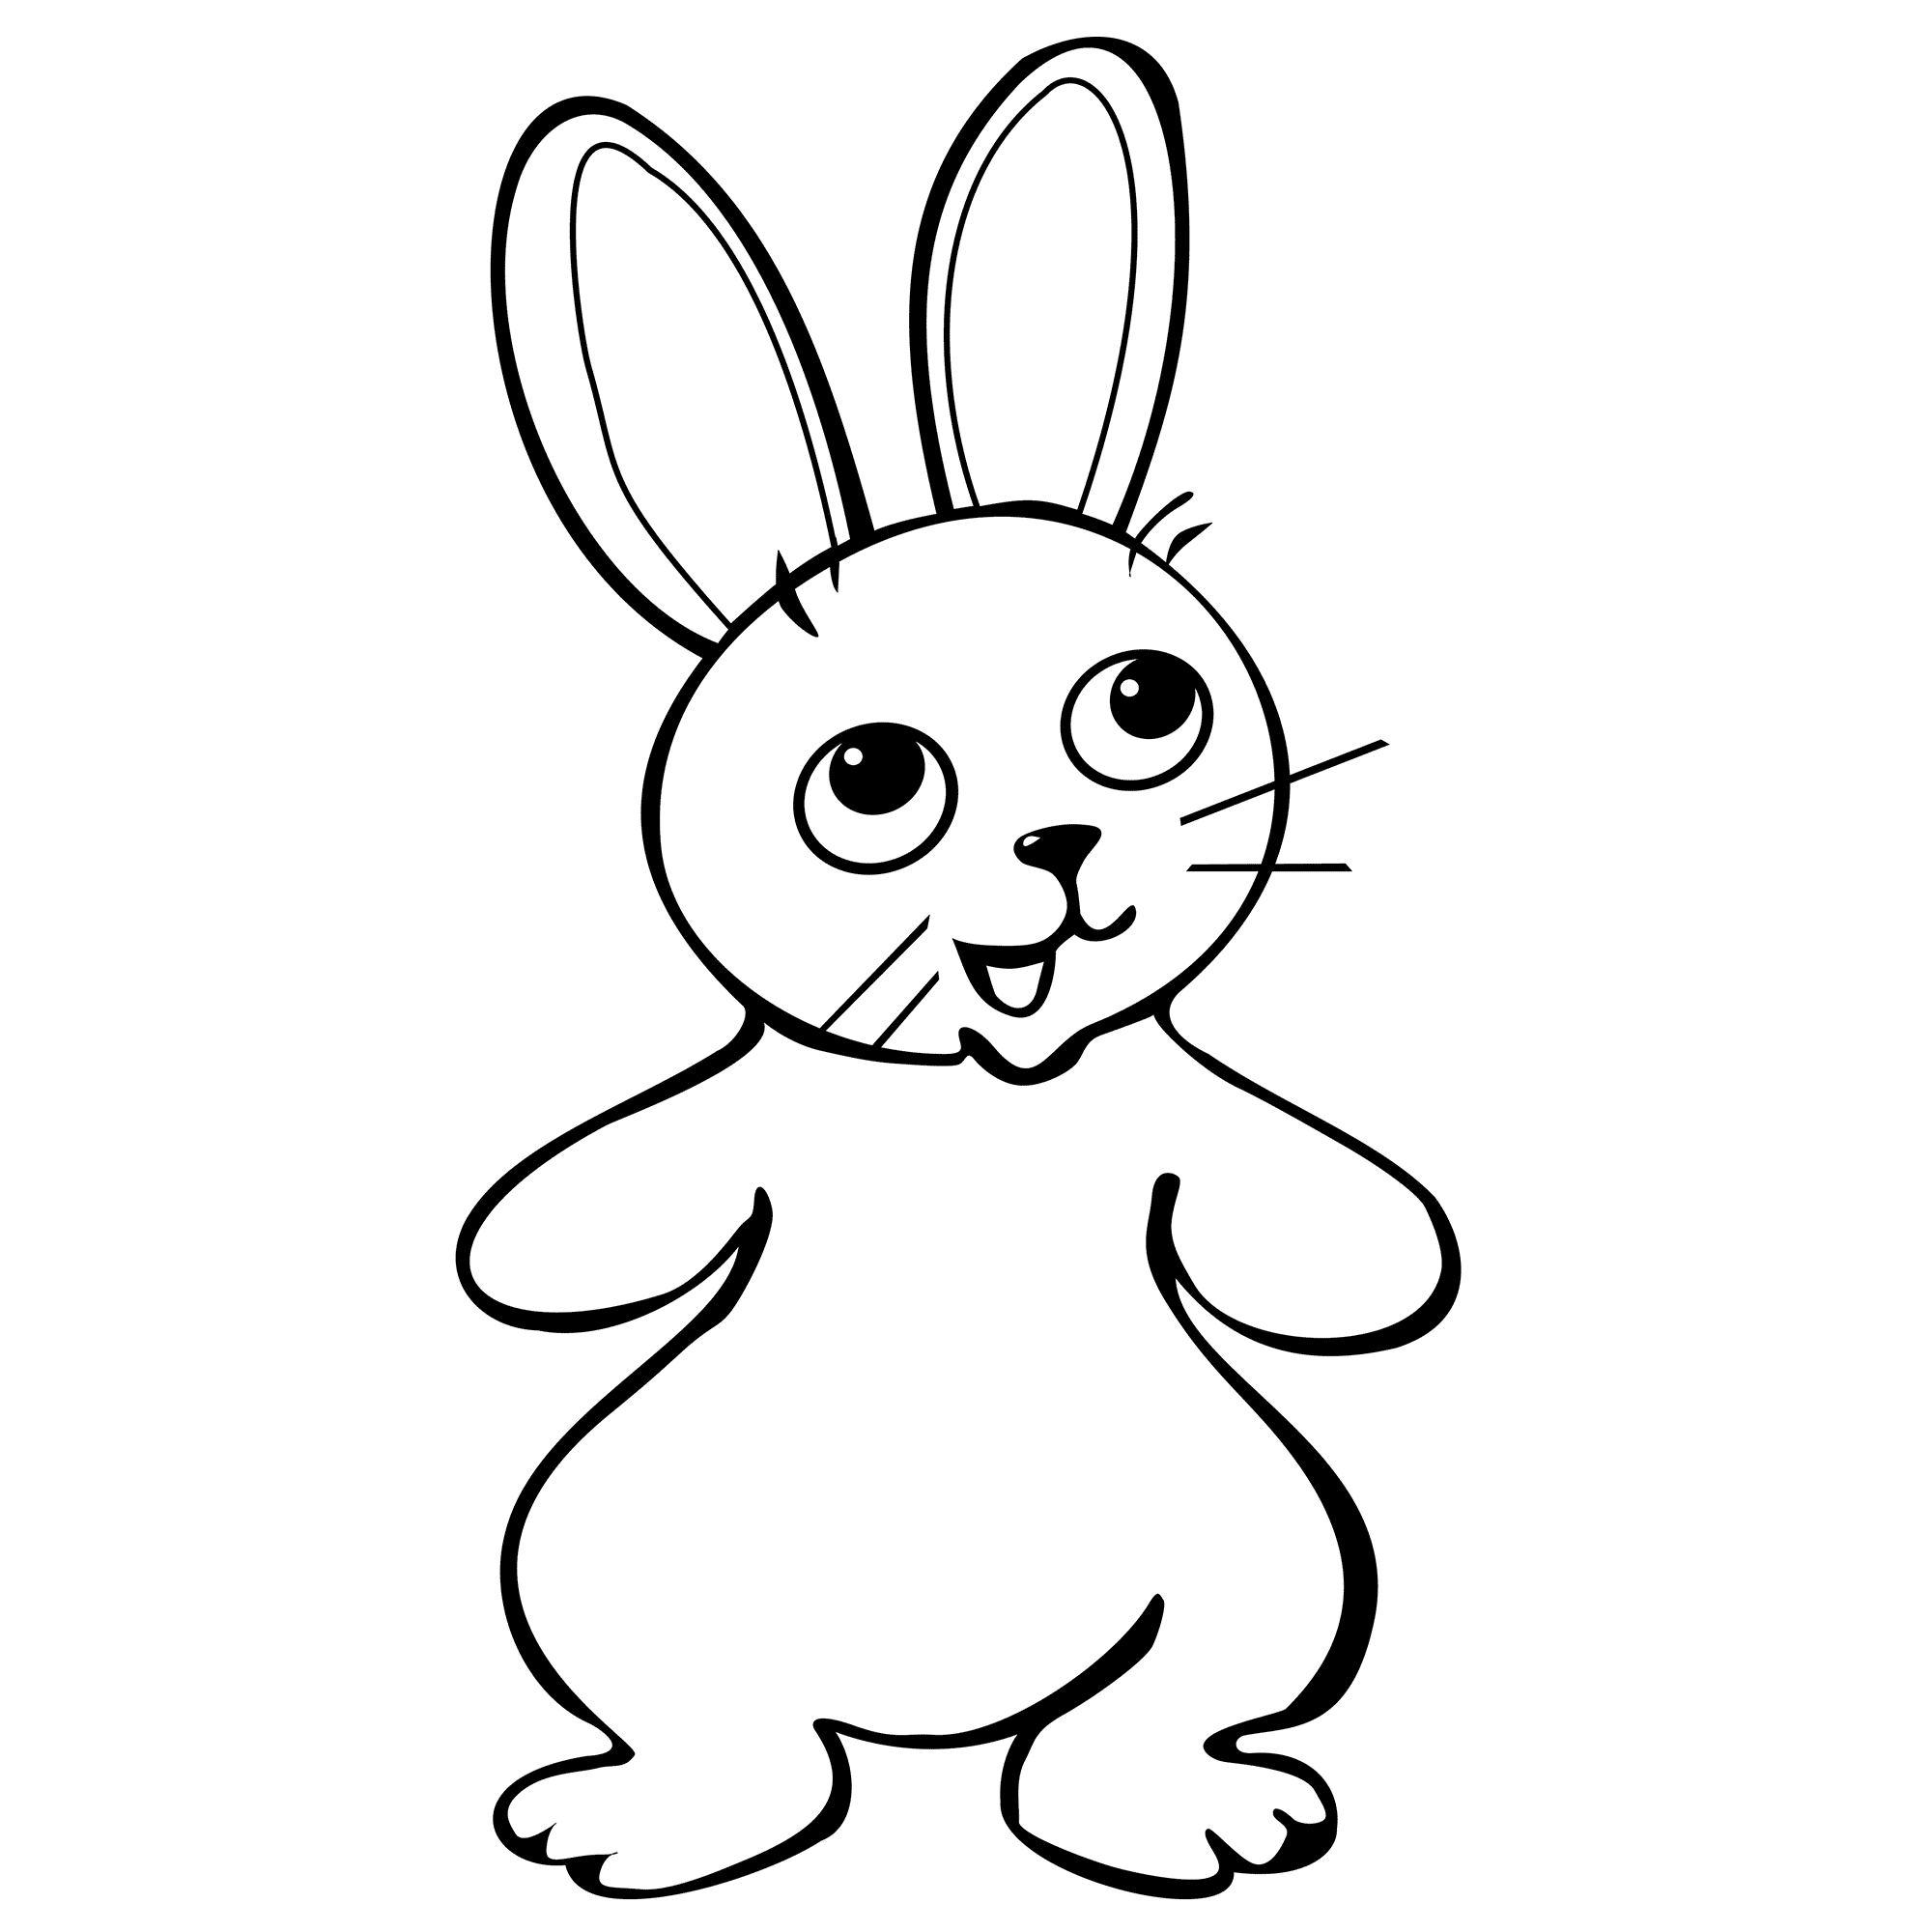 Top 99+ Images how to draw a bunny standing up Updated